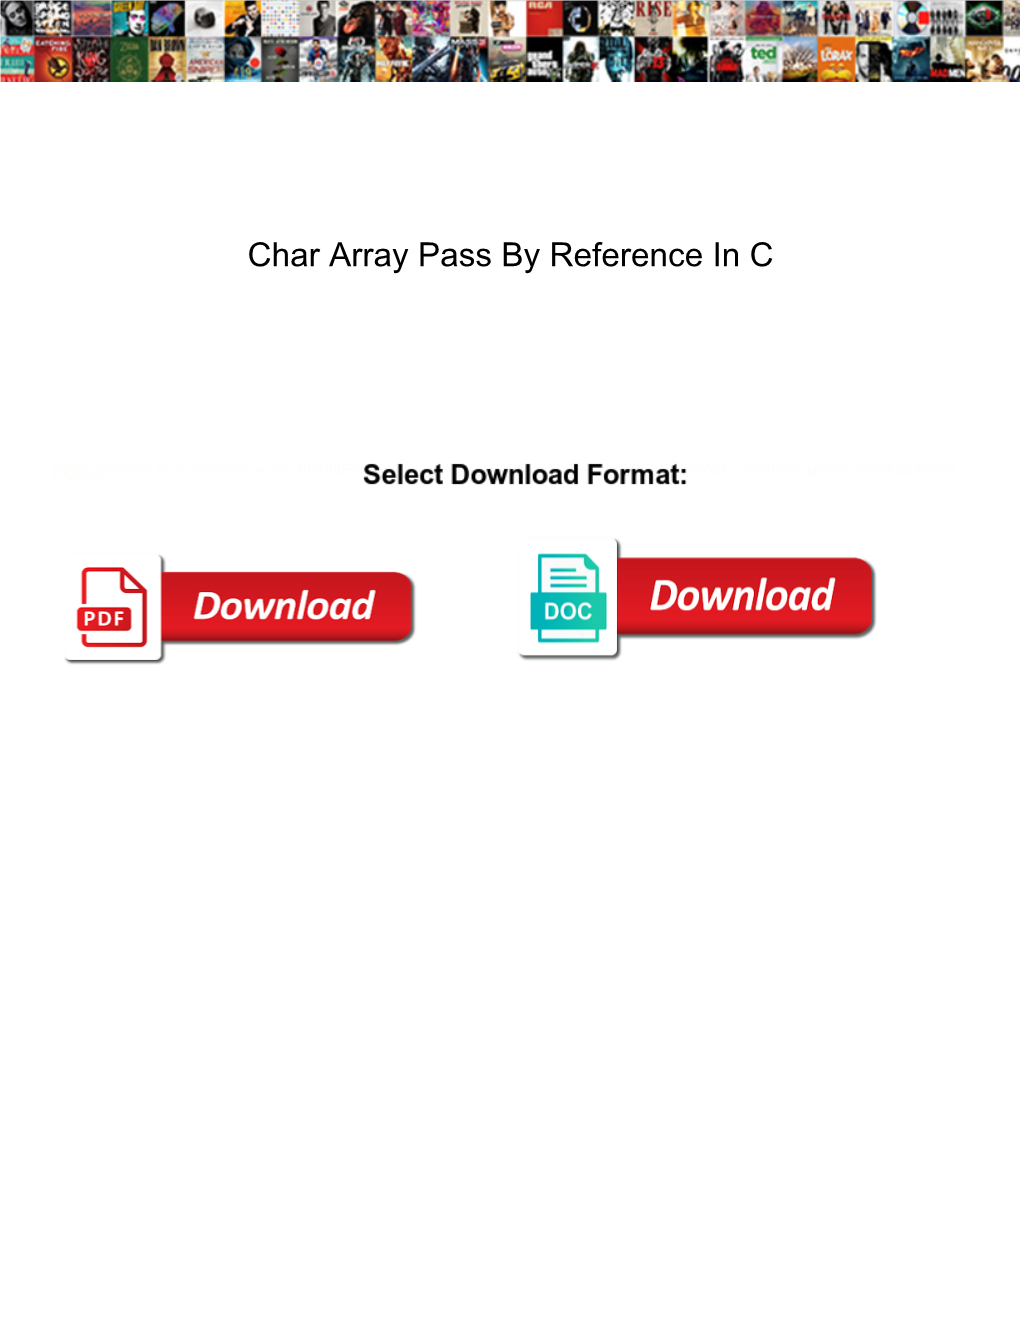 Char Array Pass by Reference in C